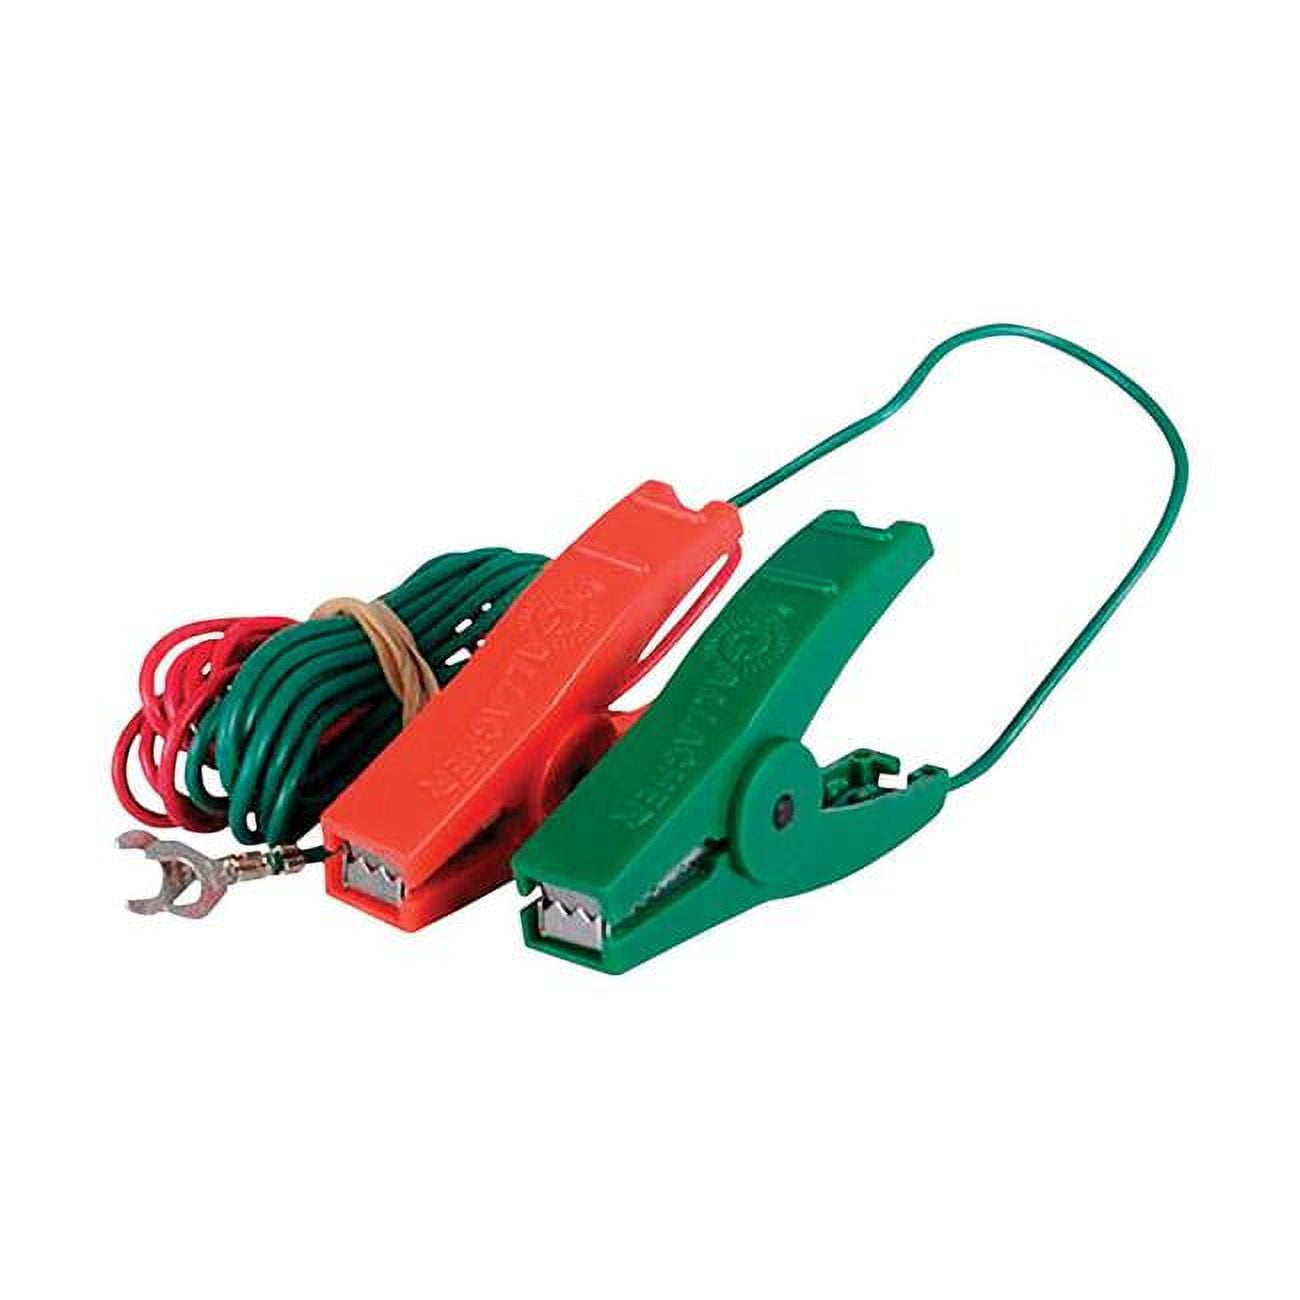 7698939 Replacement Lead Set, Red & Green